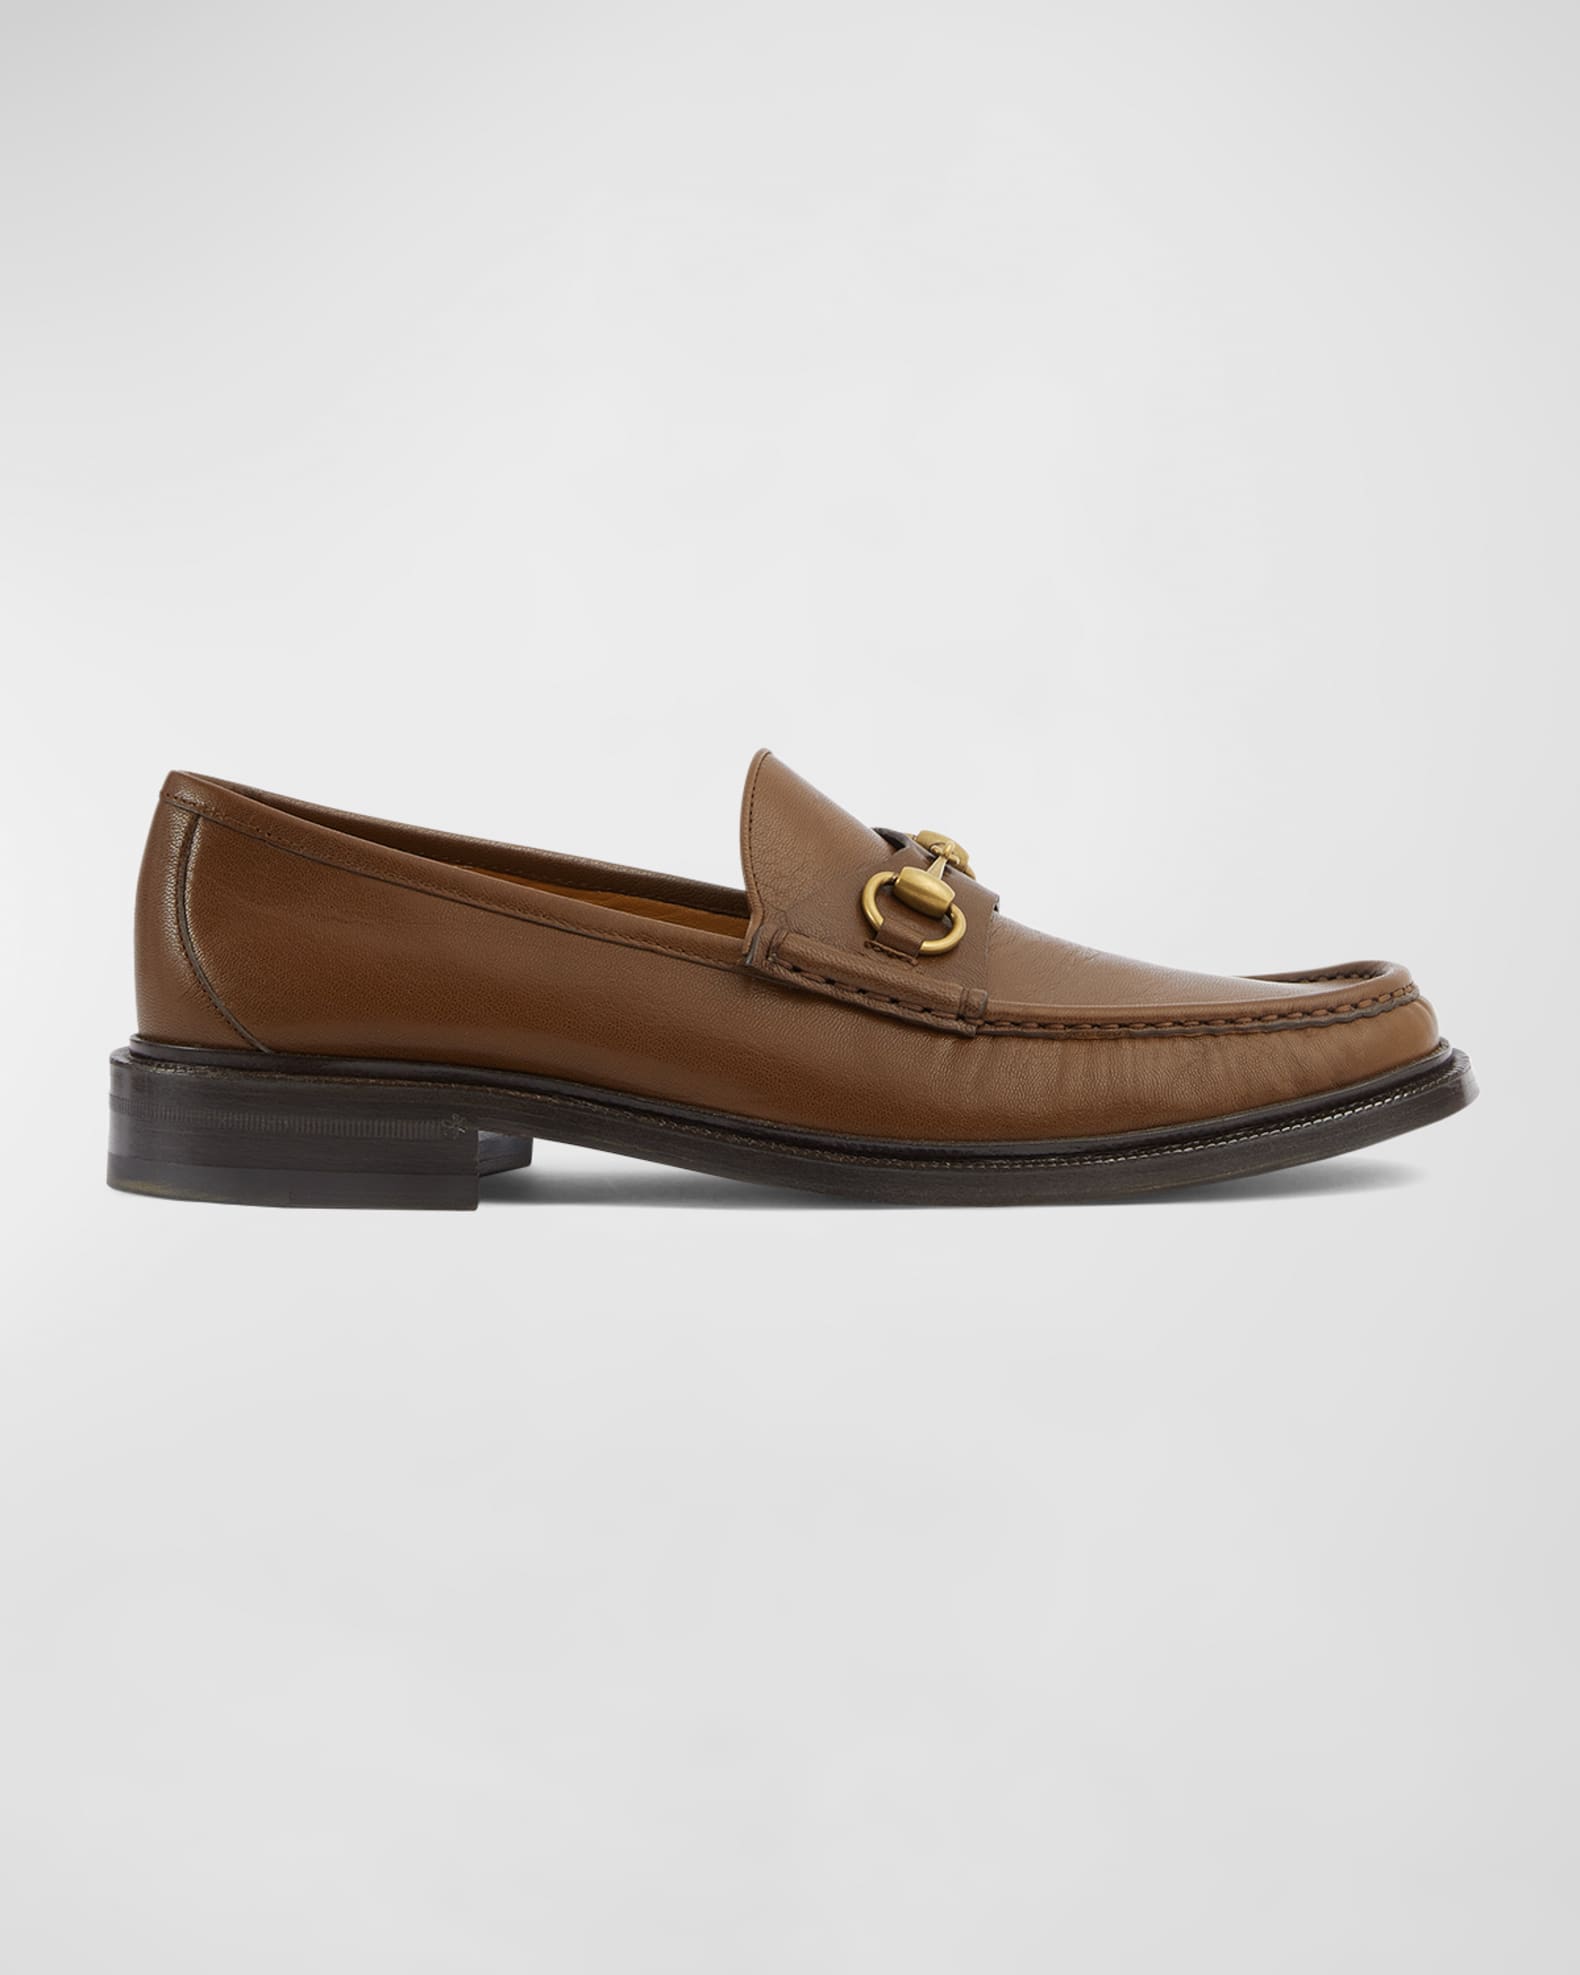 Gucci Men's Roos Leather Bit Loafers | Neiman Marcus